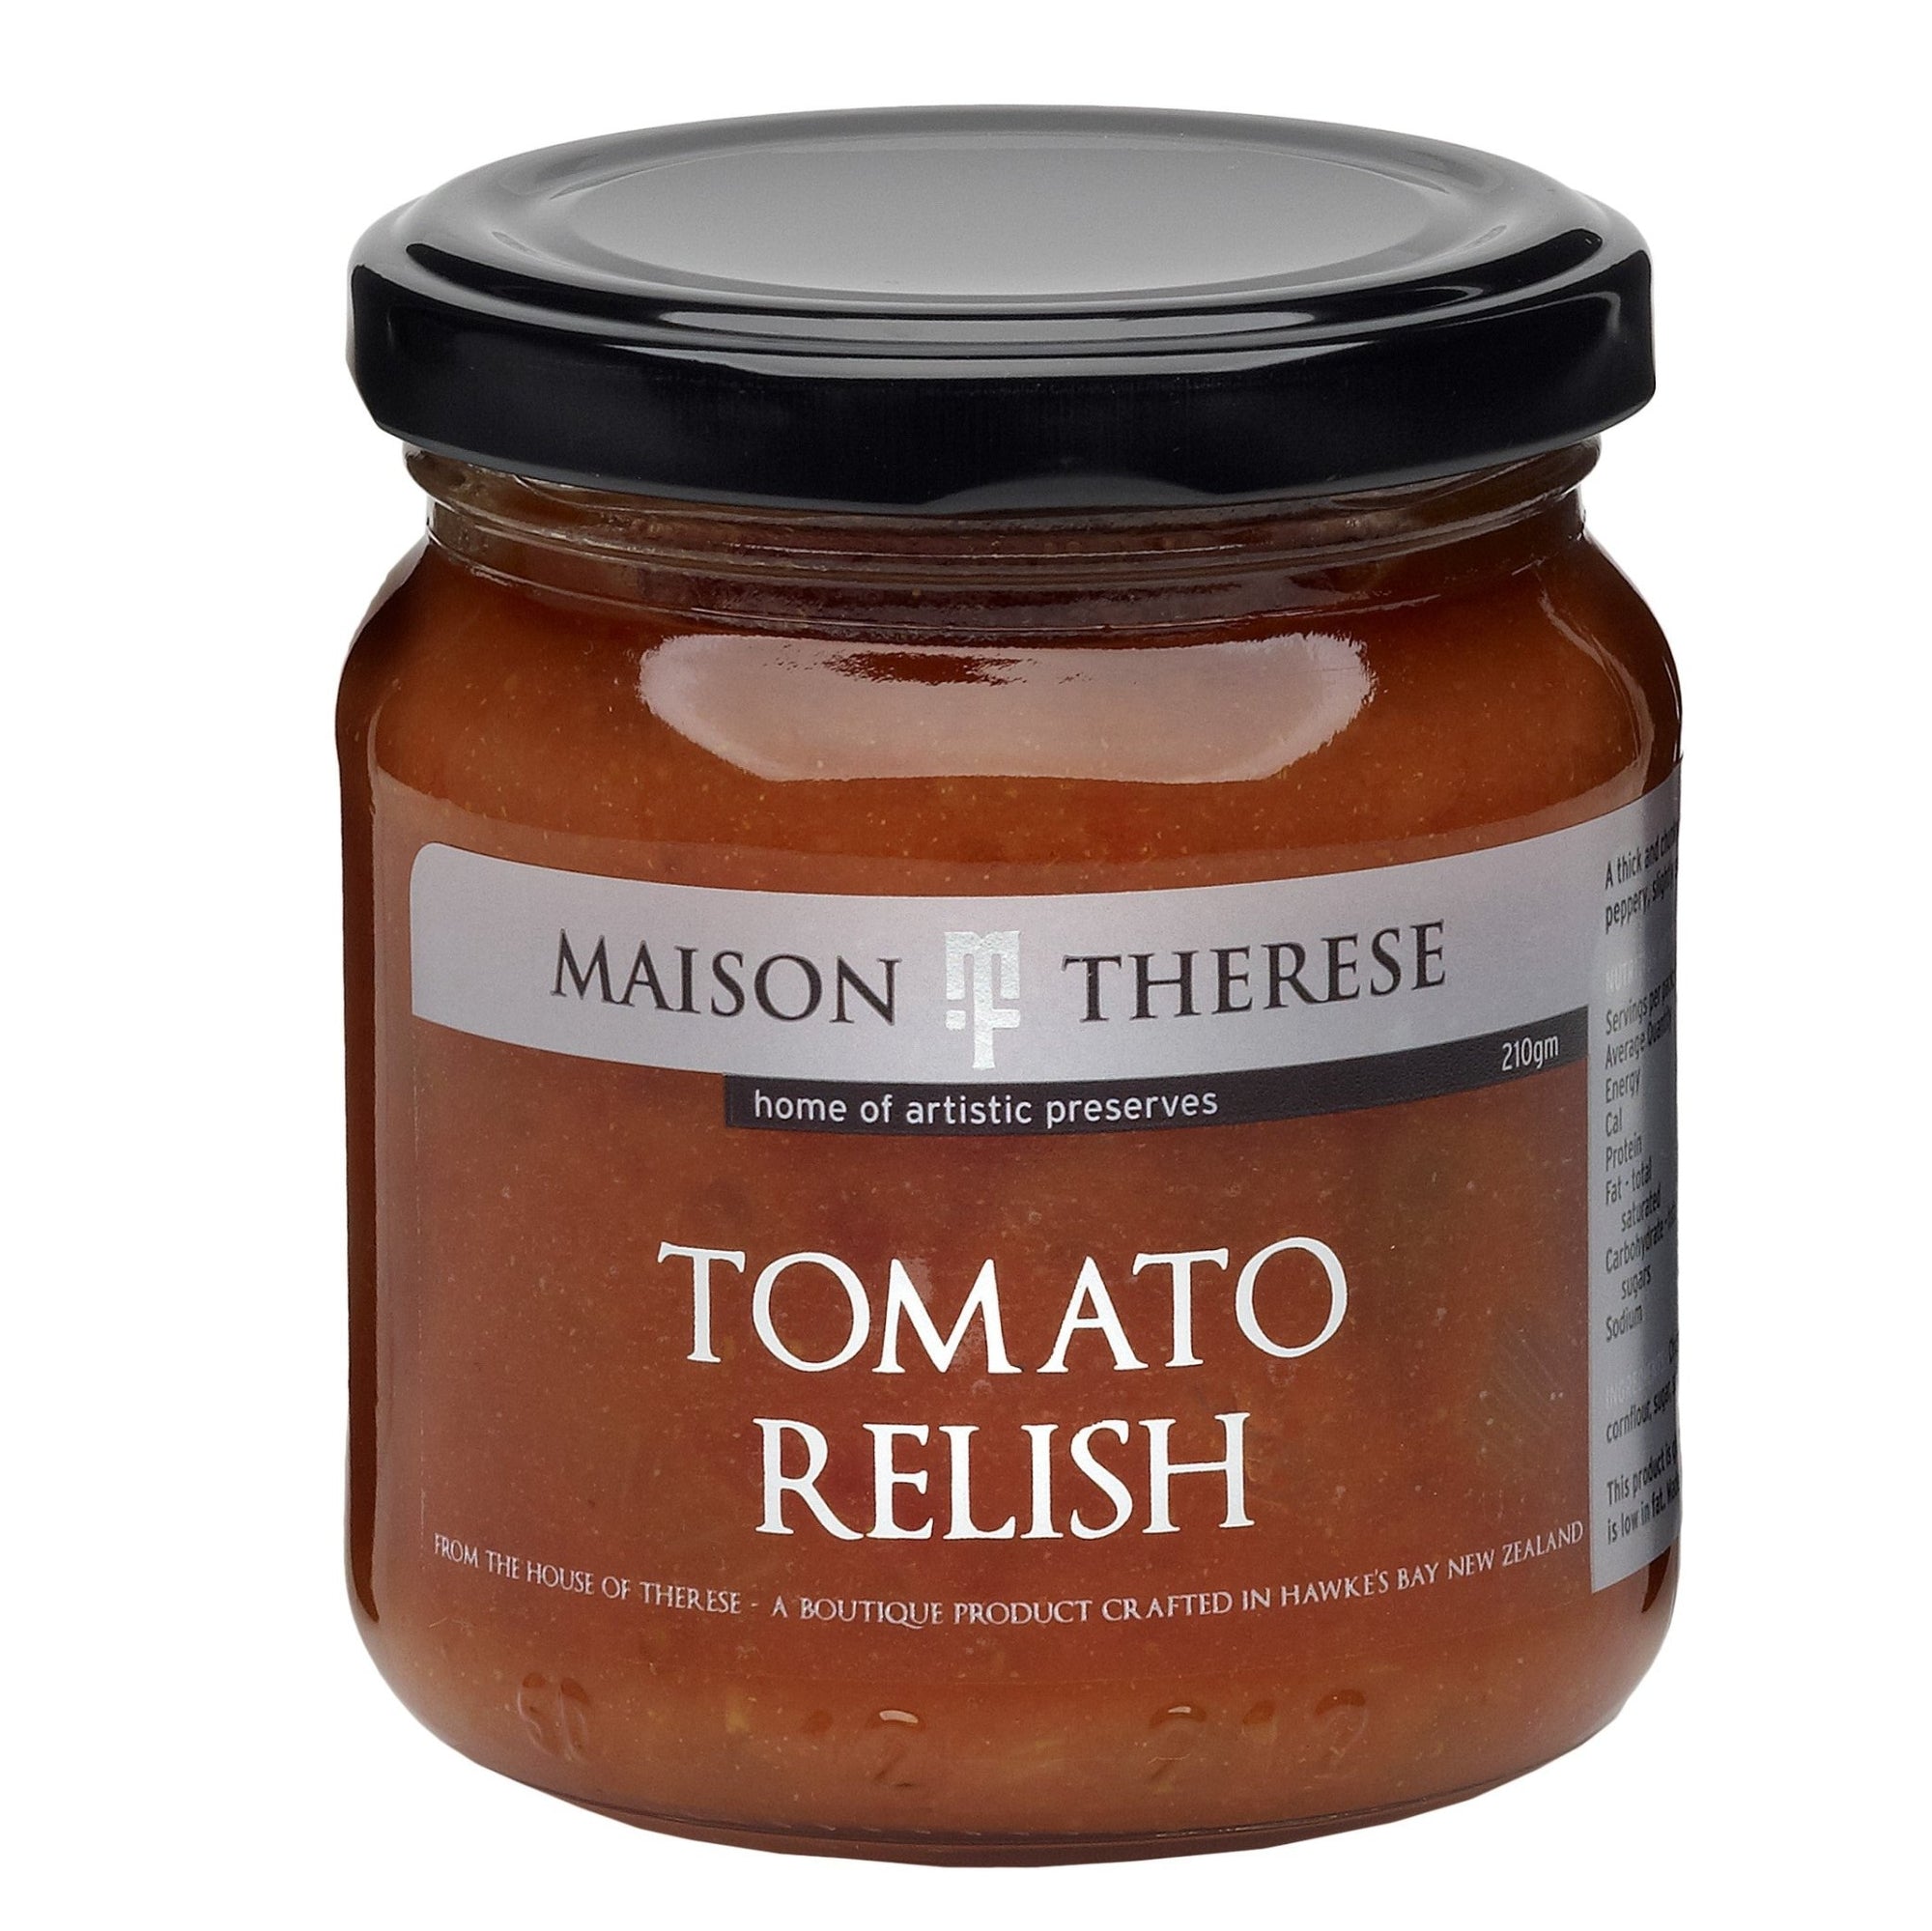 Maison Therese Tomato Relish 210g (Vegan and GF) - Beautiful Gifts - Packaged with Love